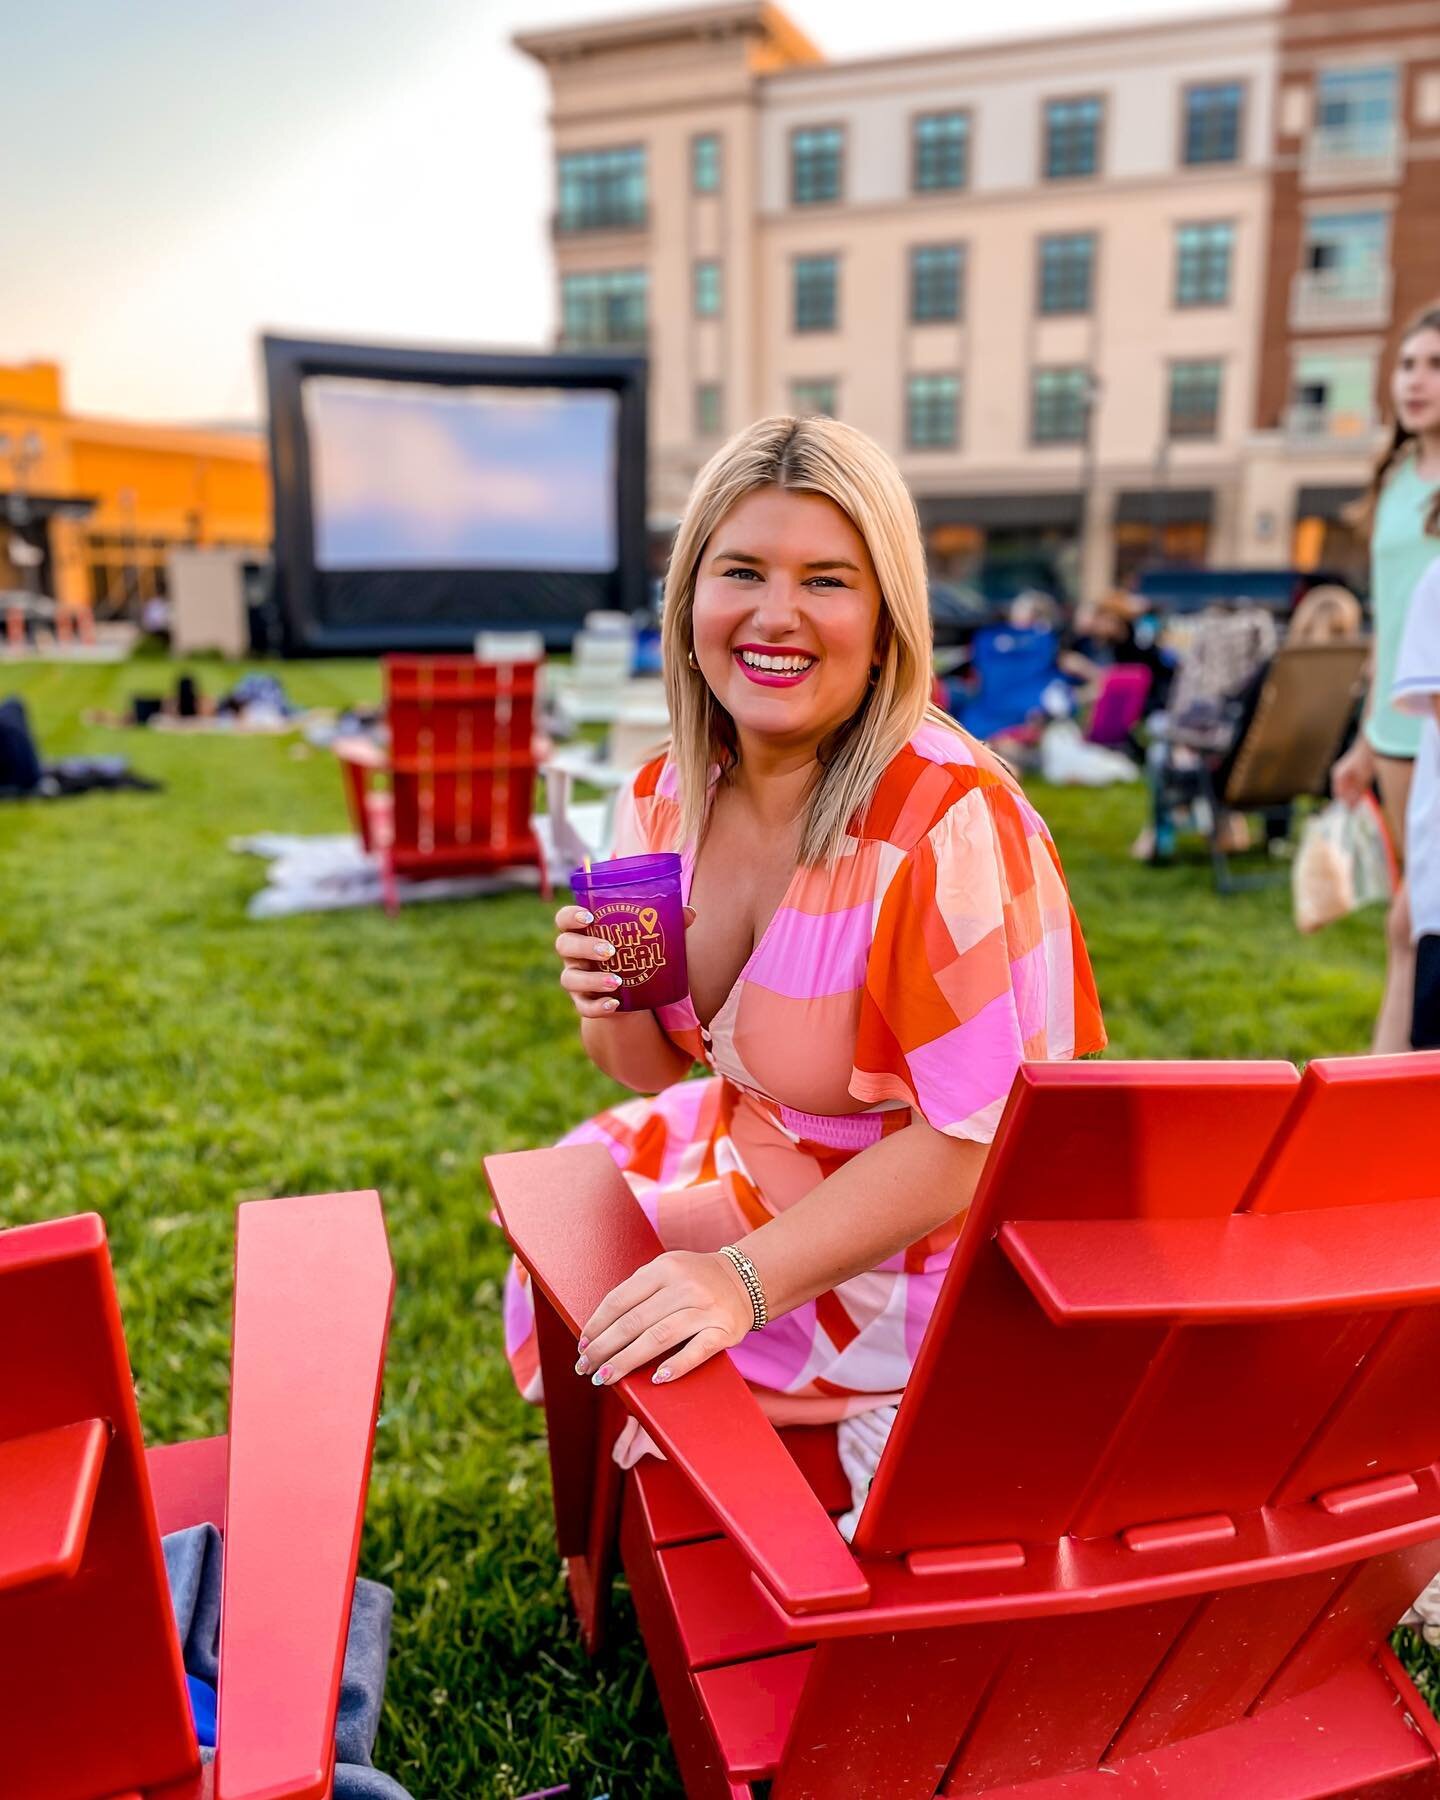 Summer Movies at @zonarosakc have officially started!! The outdoor movie series is free and takes place on the lawn in North Park (right in front of @dillards ) the third Saturday of every month from now through September! Movies start at dusk and th